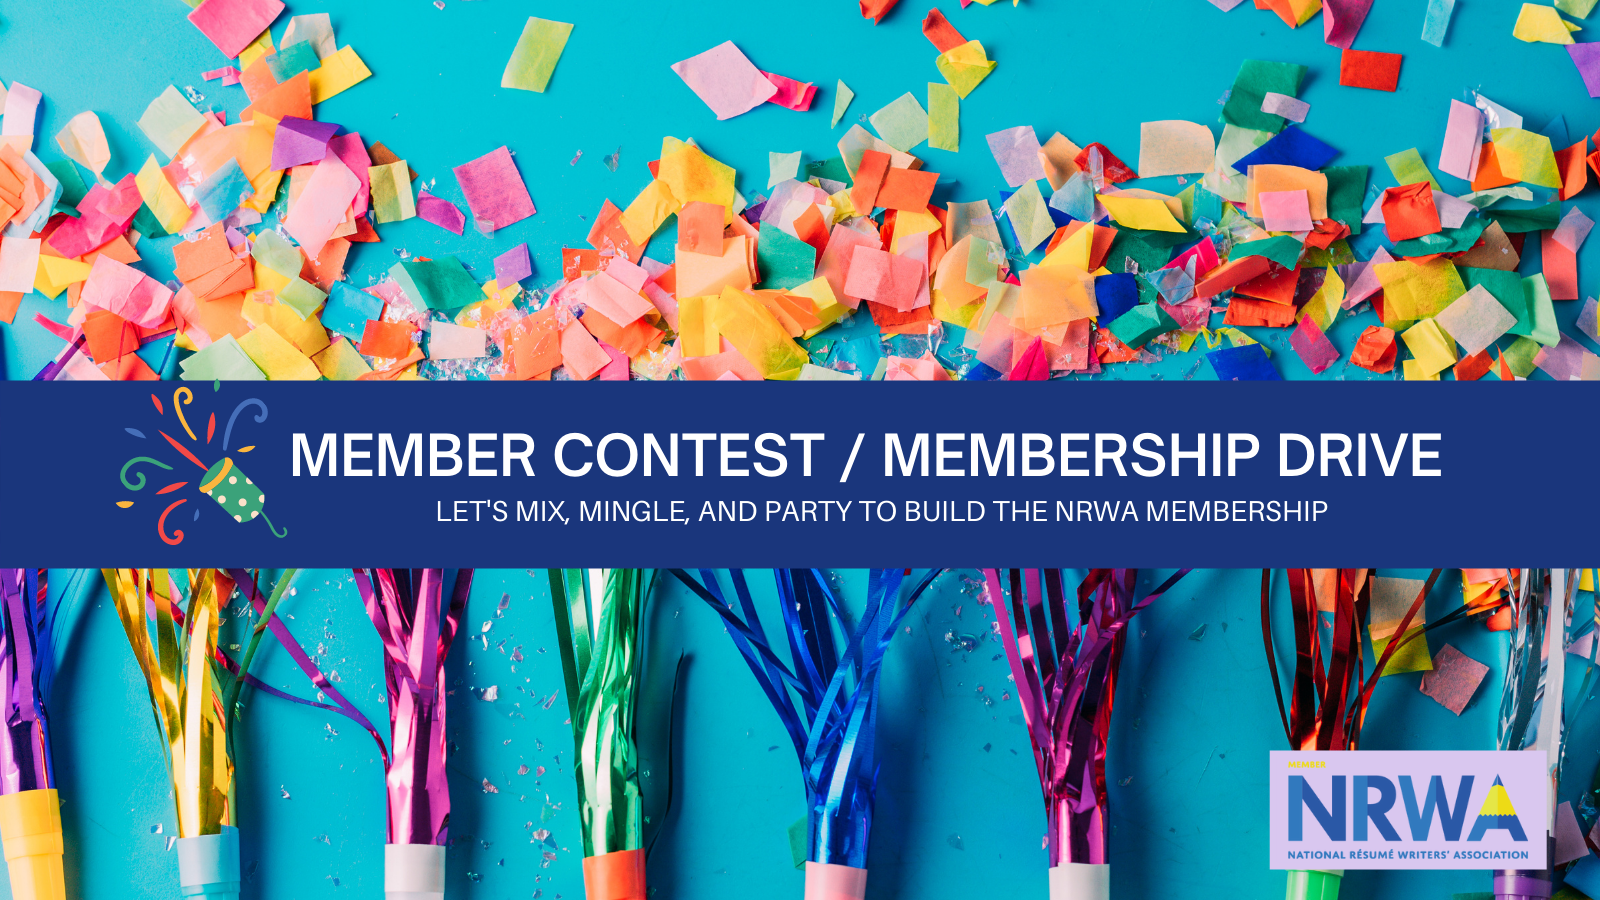 NRWA Member Contest / Membership Drive - Let's mix, mingle, and party to build the NRWA Membership